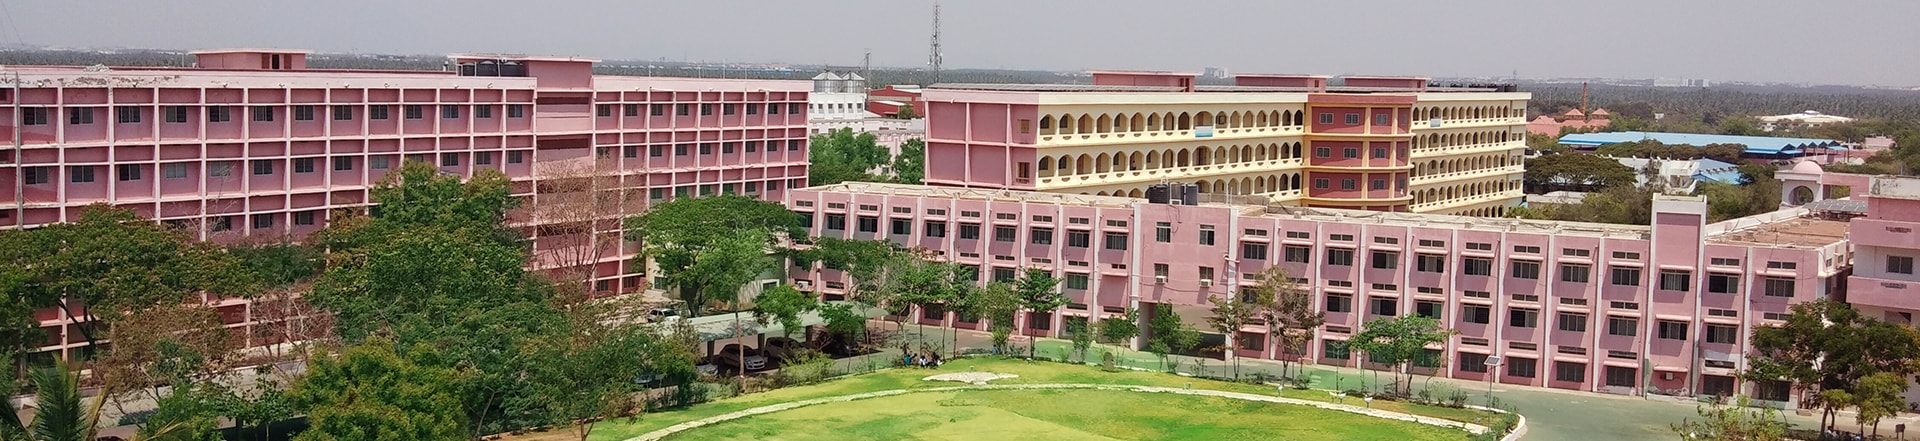 RVS Dental College and Hospital, Coimbatore Image